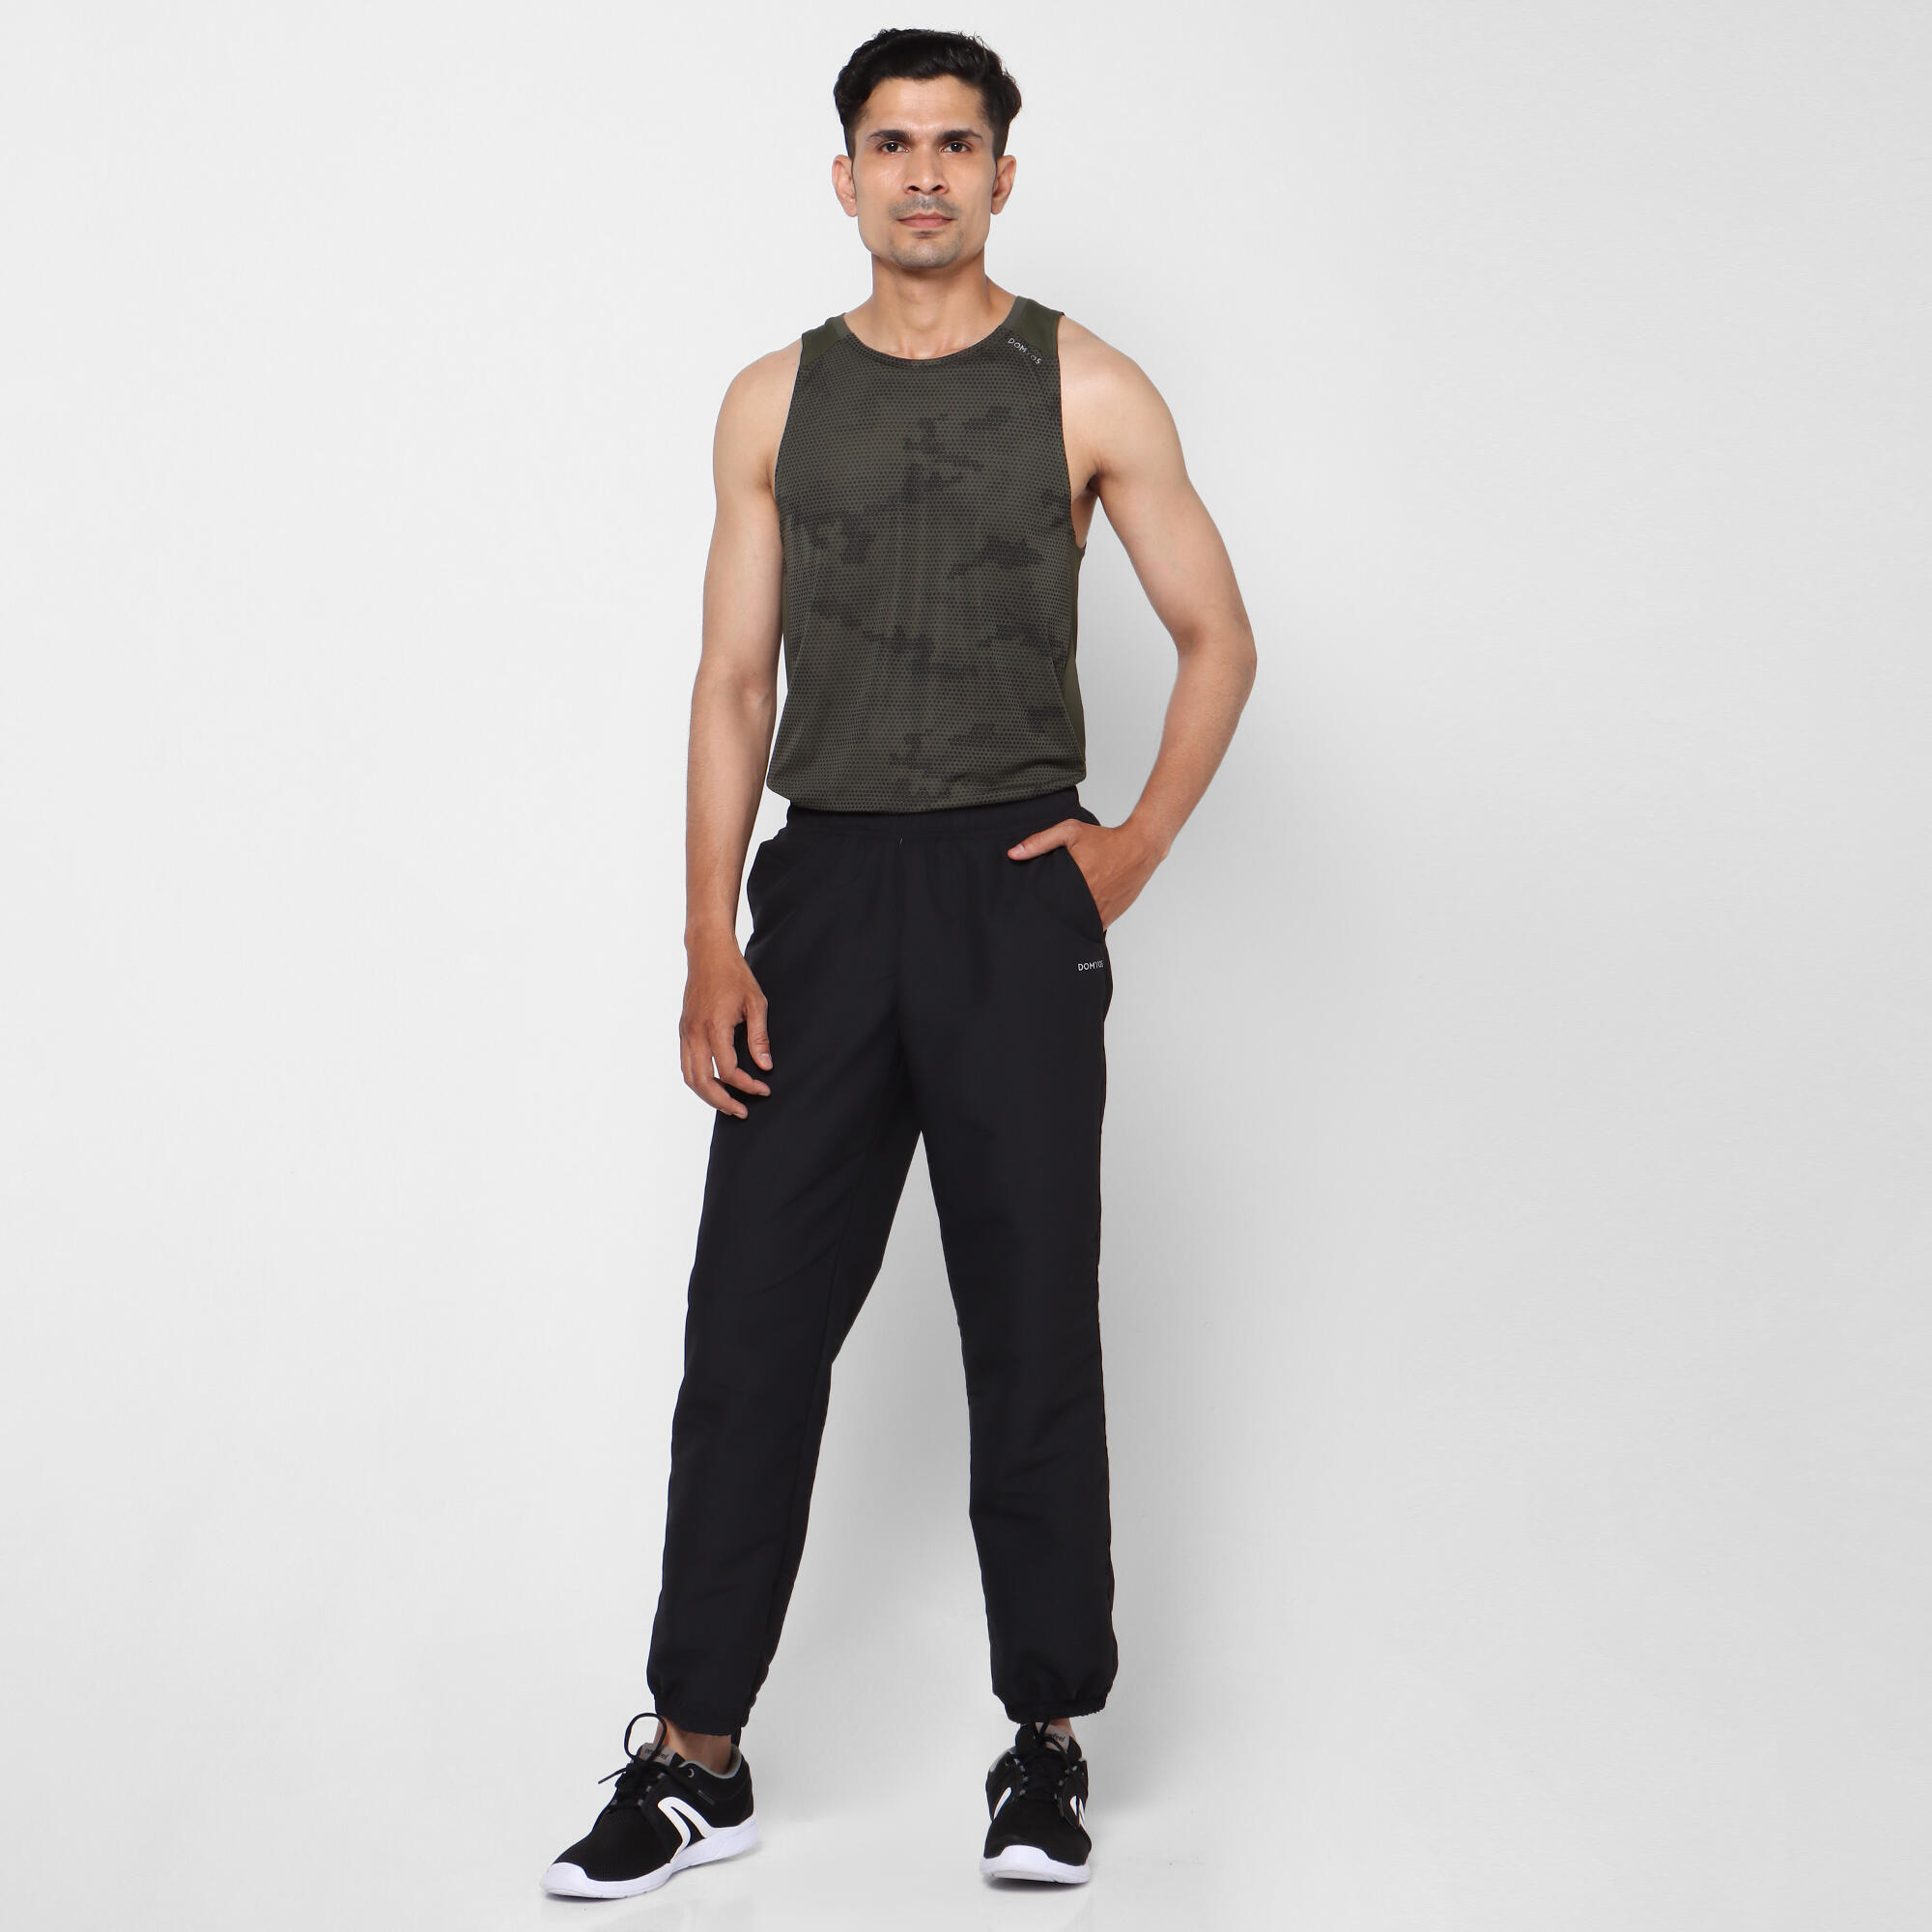 Top 10 Best Track Pants for Men from the Top Brands in India  DesiDime